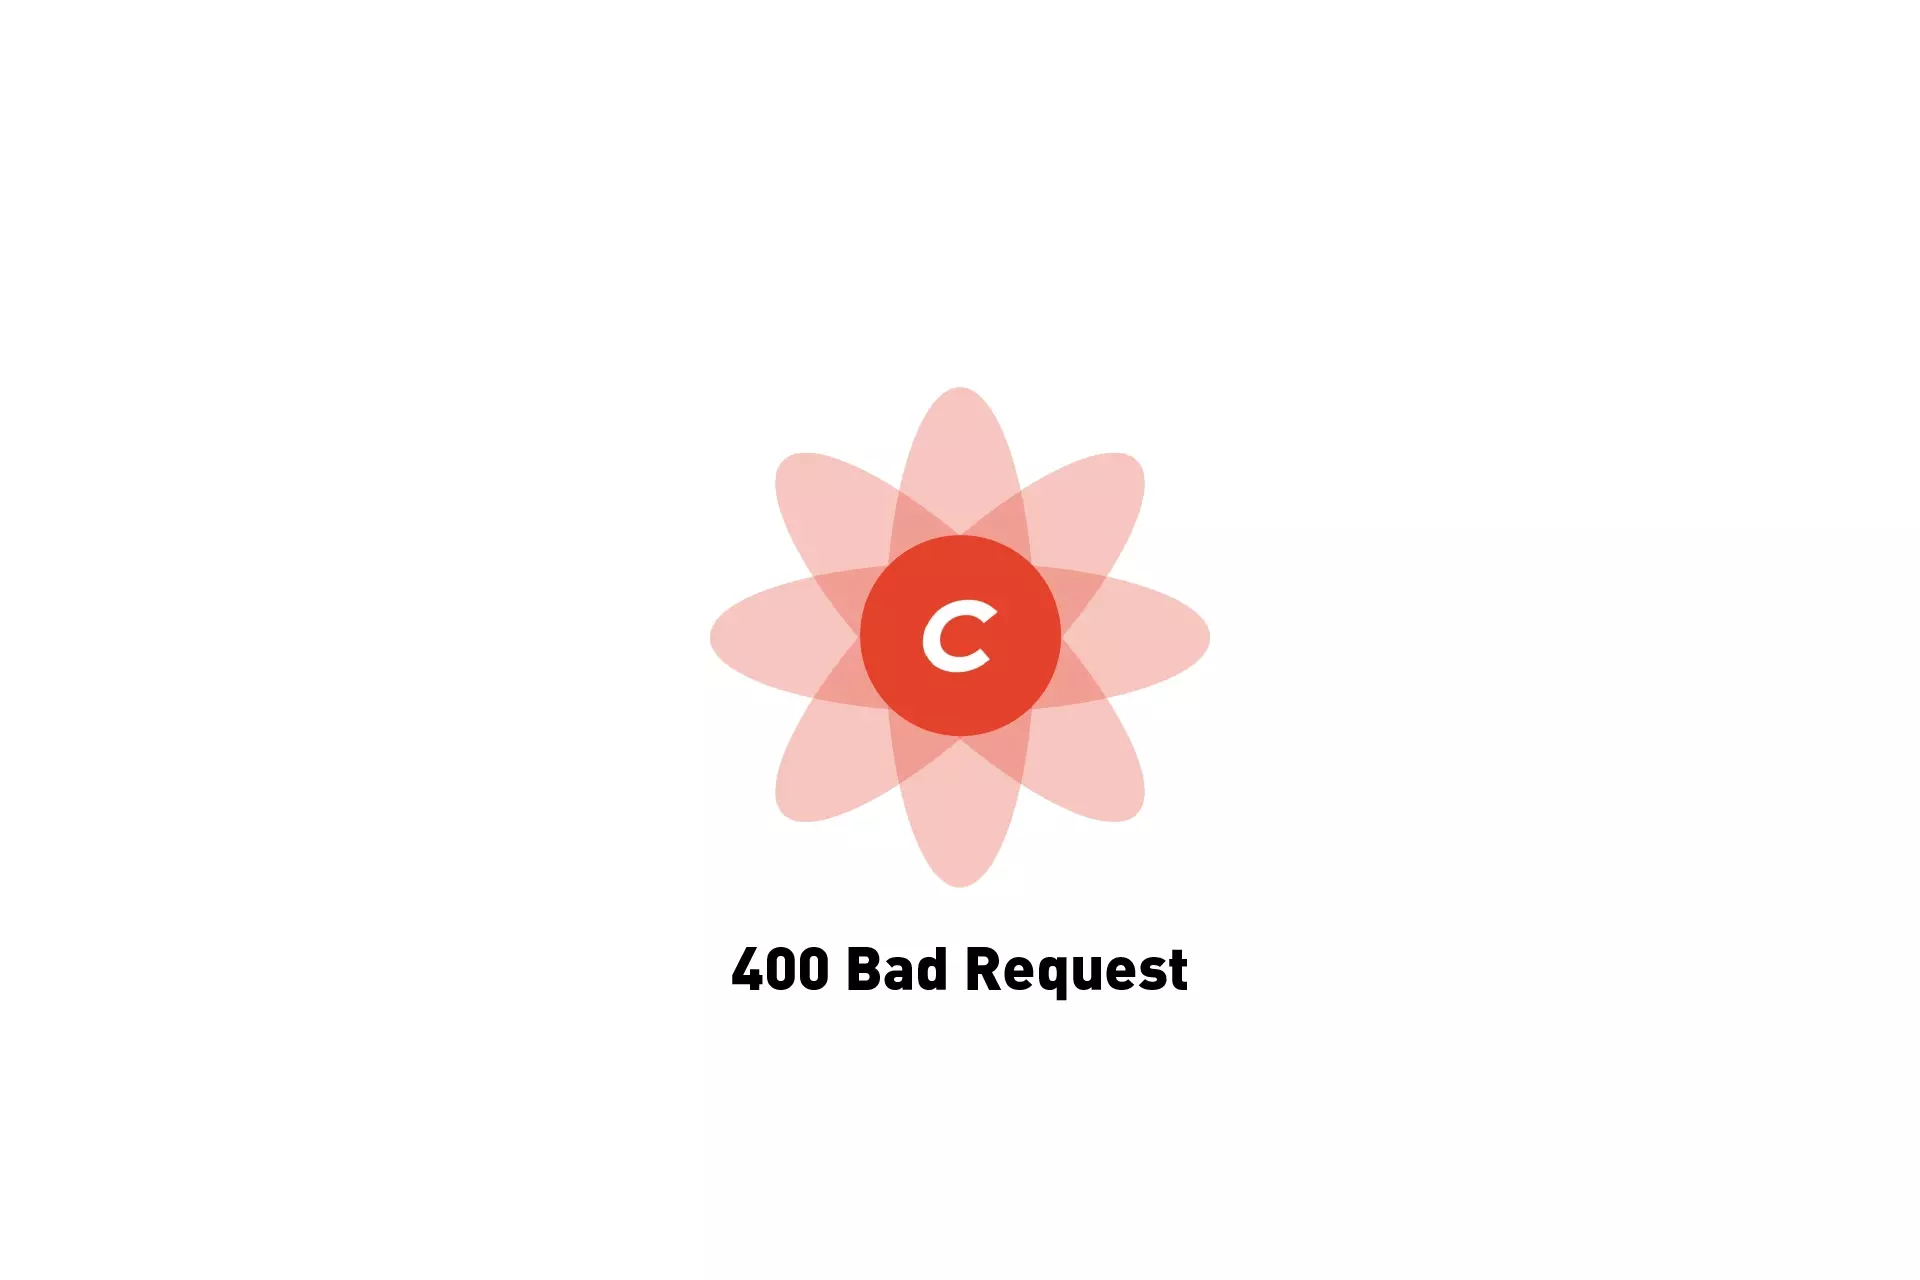 A flower that represents Craft CMS. Beneath it sits the text "400 Bad Request."